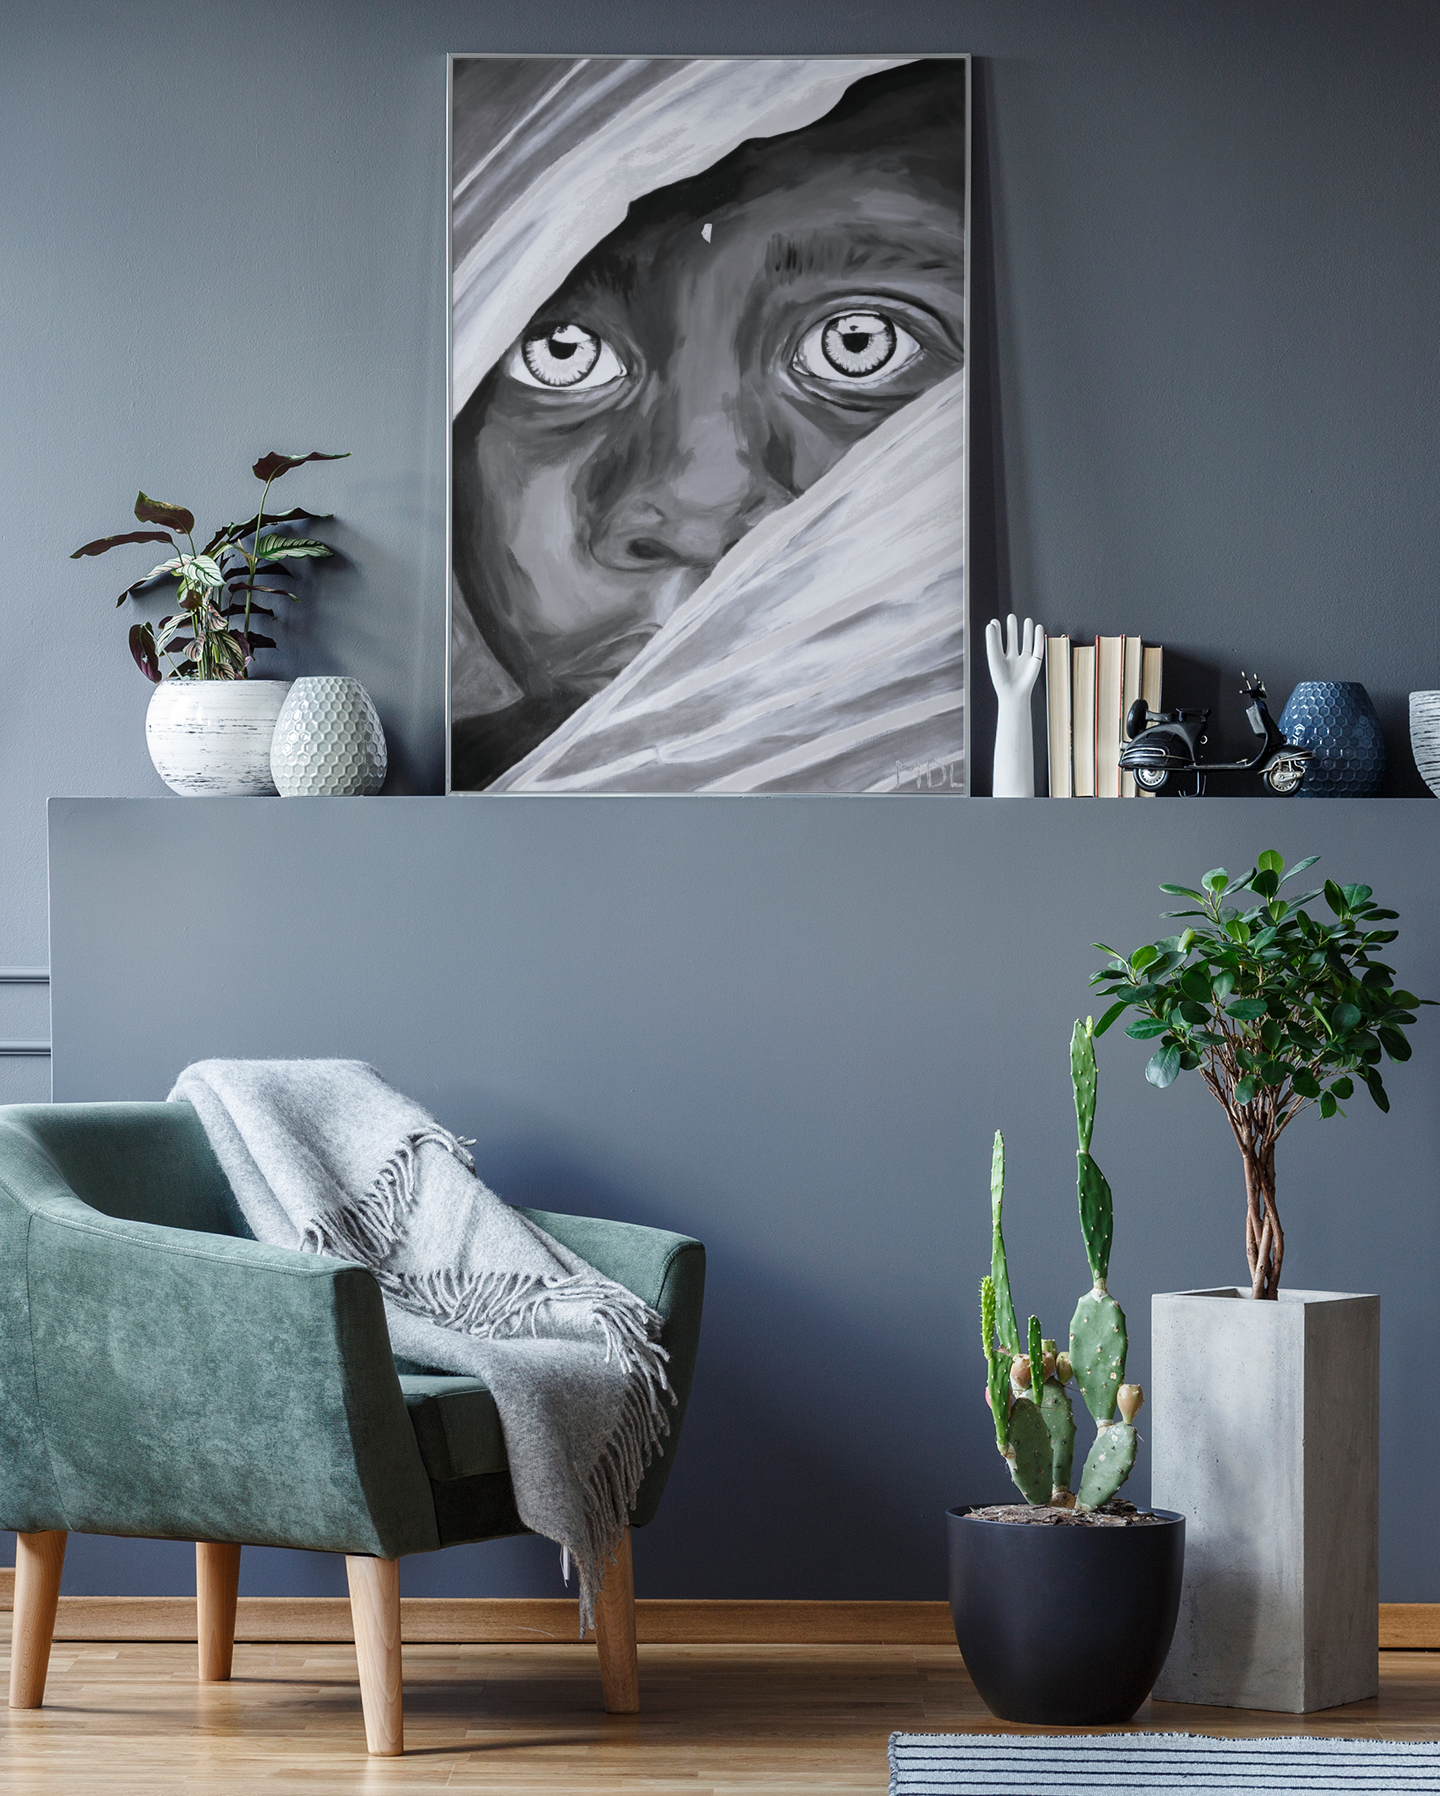 A black and white giclee art print of a curious African Boy leaning up against a wall on a shelf in a living room with green chair and plants